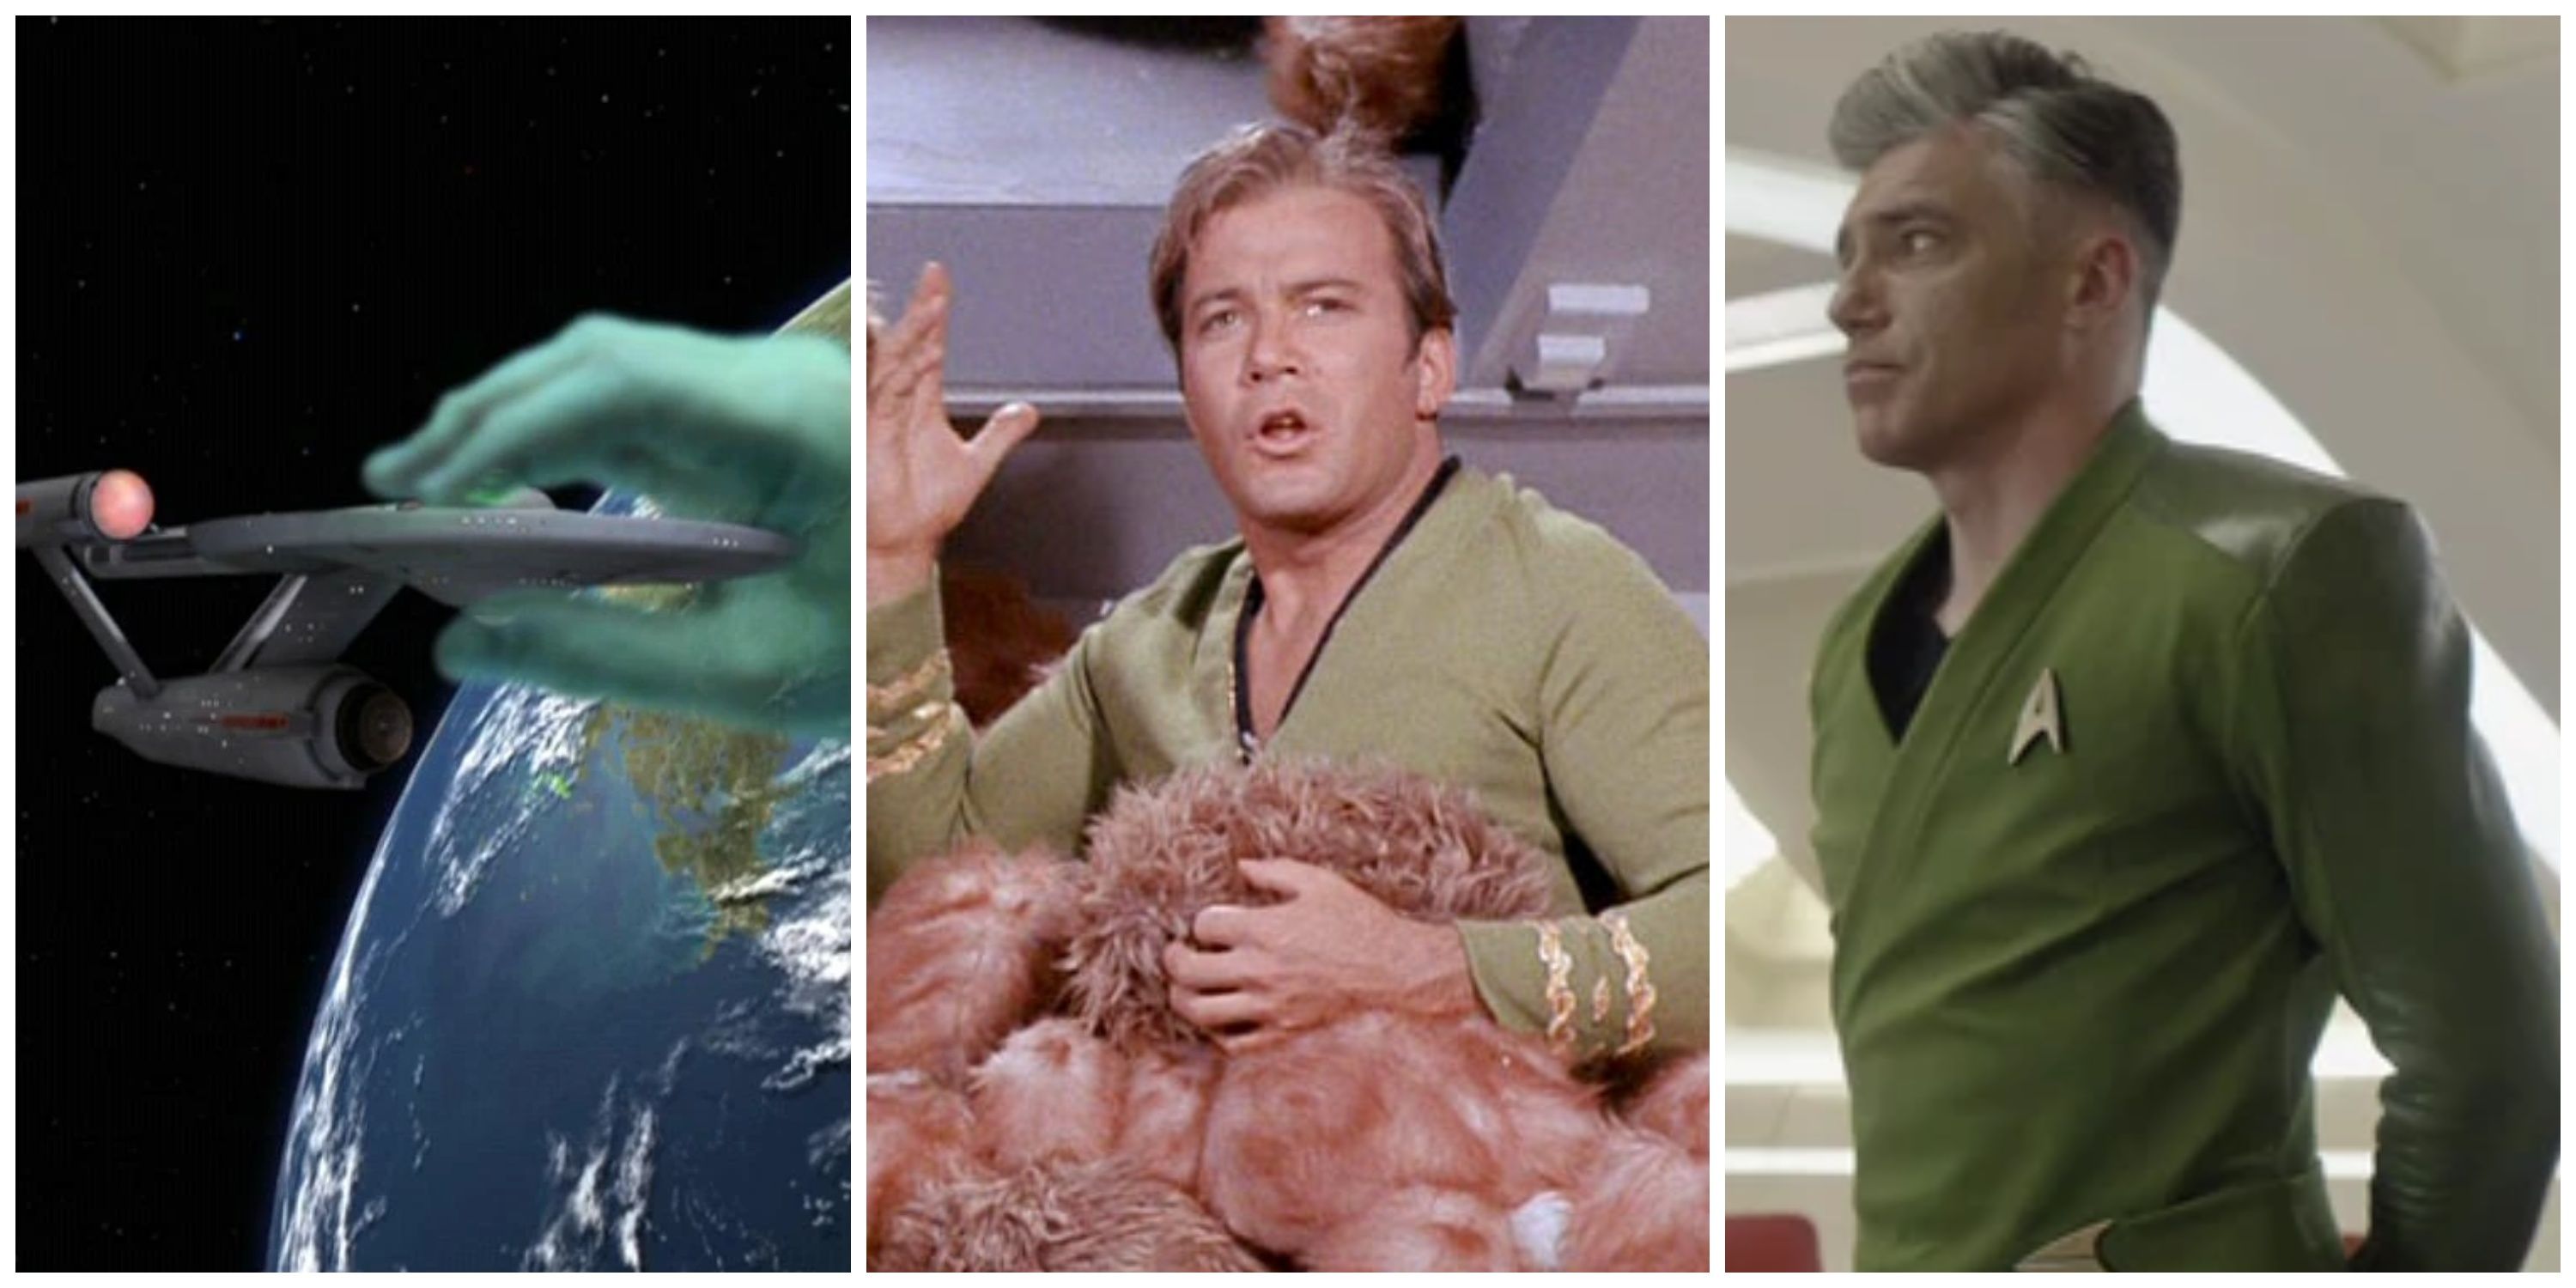 apollo green hand grabbing the enterprise, kirk with tribbles, pike in a green shirt